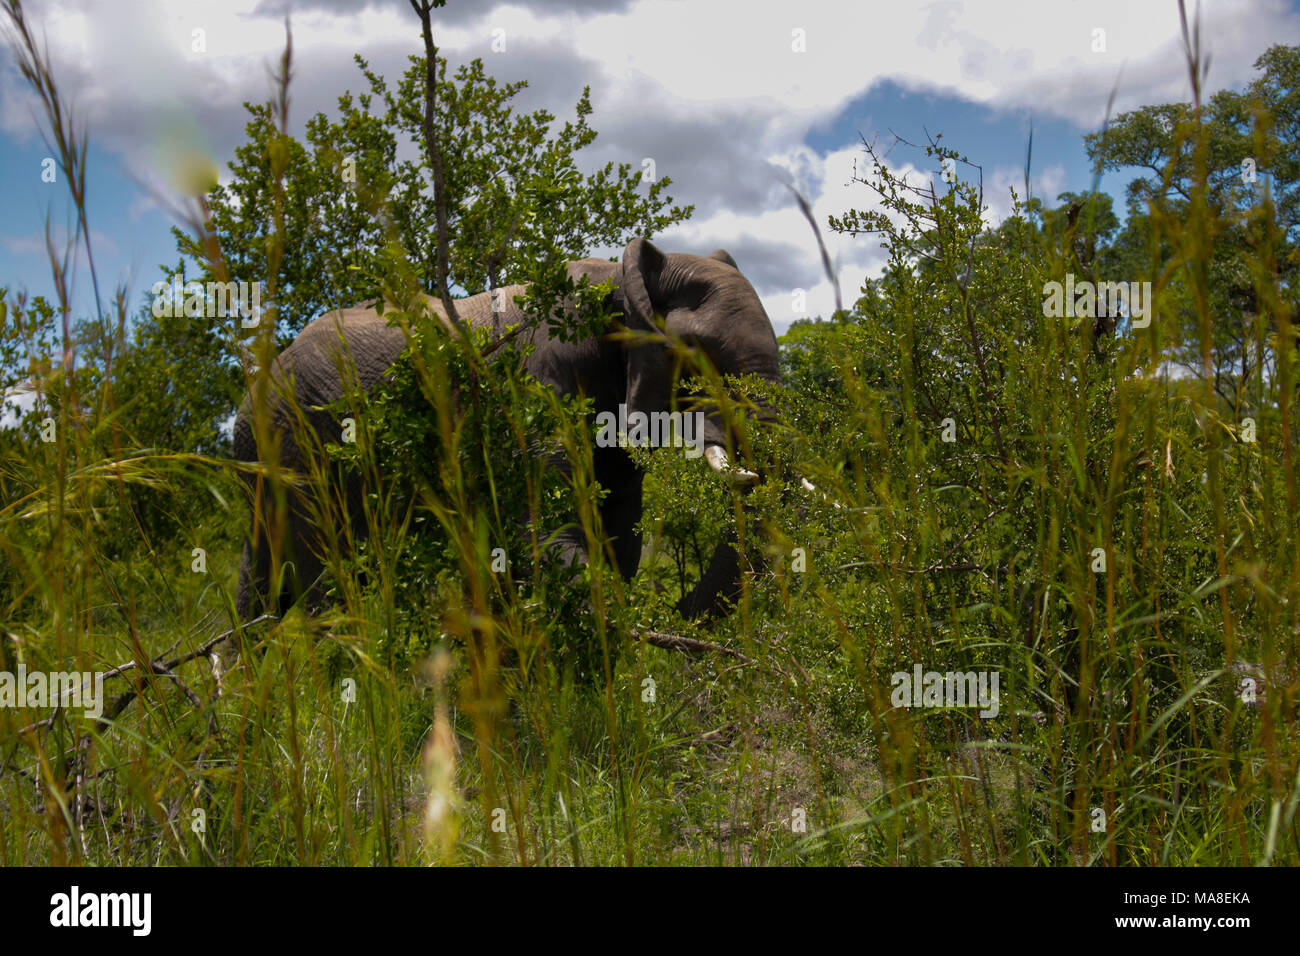 Elephant in the jungle at South Africa Stock Photo